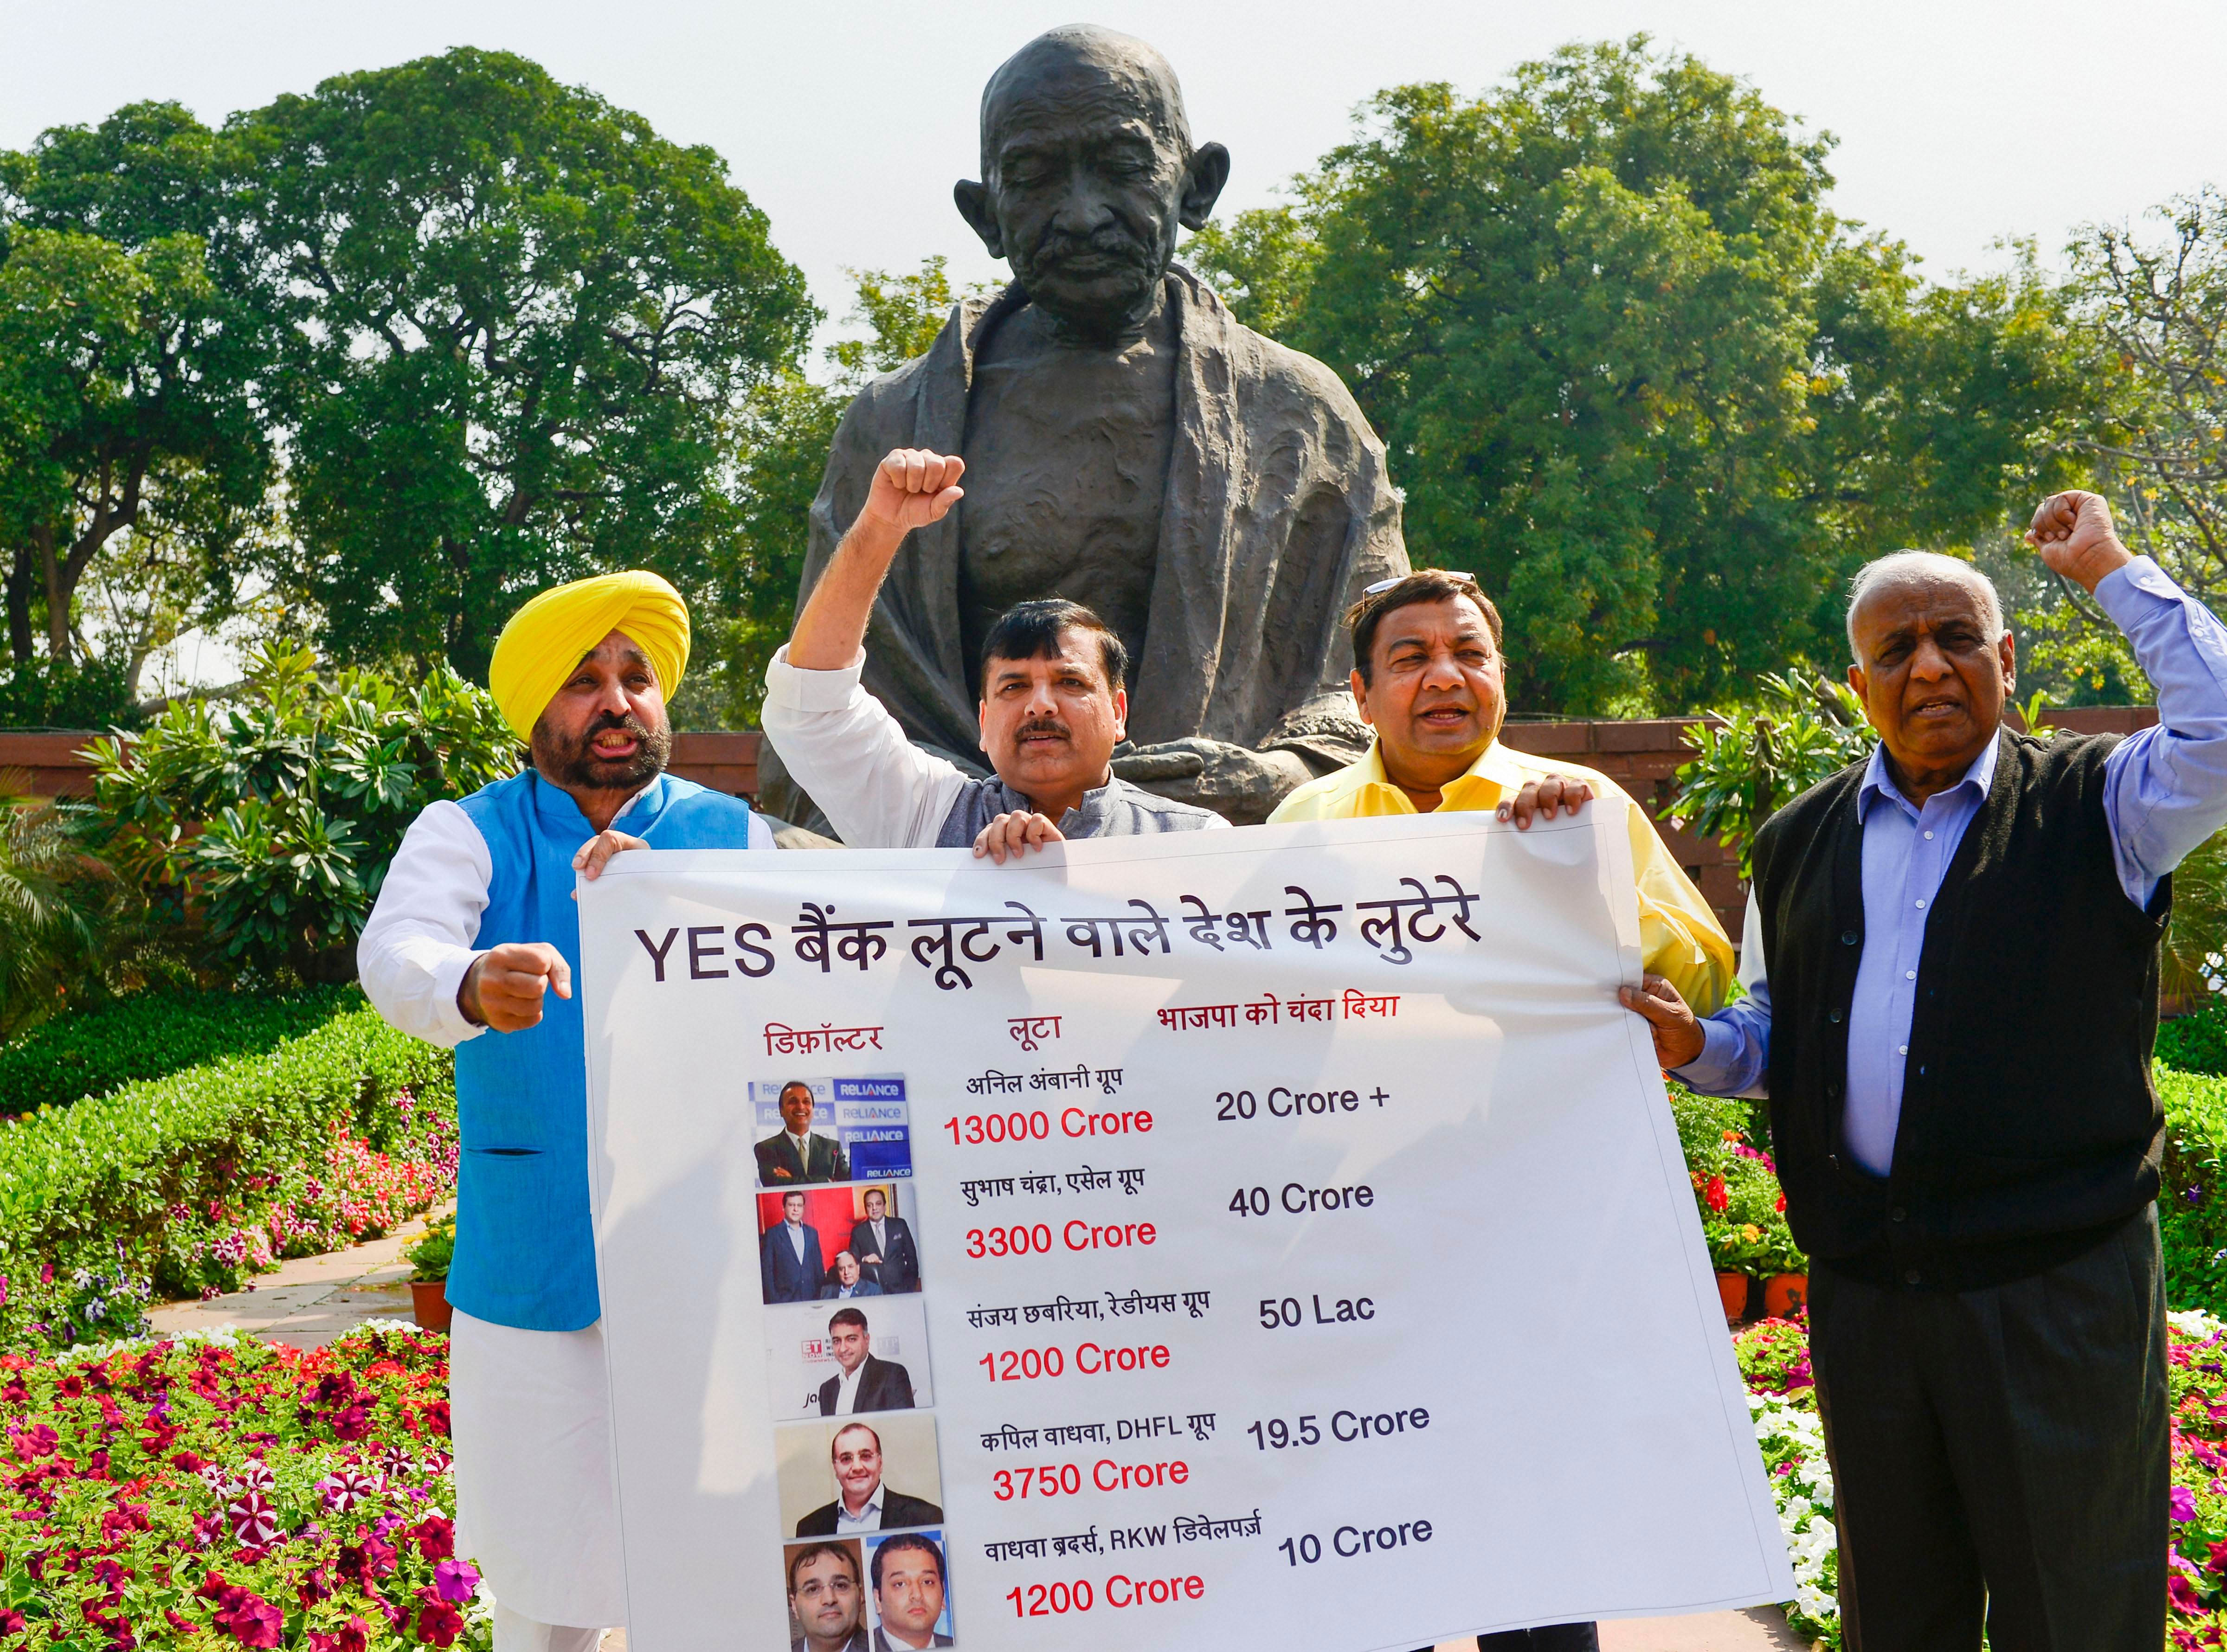 Aam Aadmi Party MPs Bhagwant Mann, Sanjay Singh, Sushil Gupta and N D Gupta raise slogans during a protest over the Yes Bank scam, at Parliament during the ongoing Budget Session, in New Delhi. (PTI Photo)